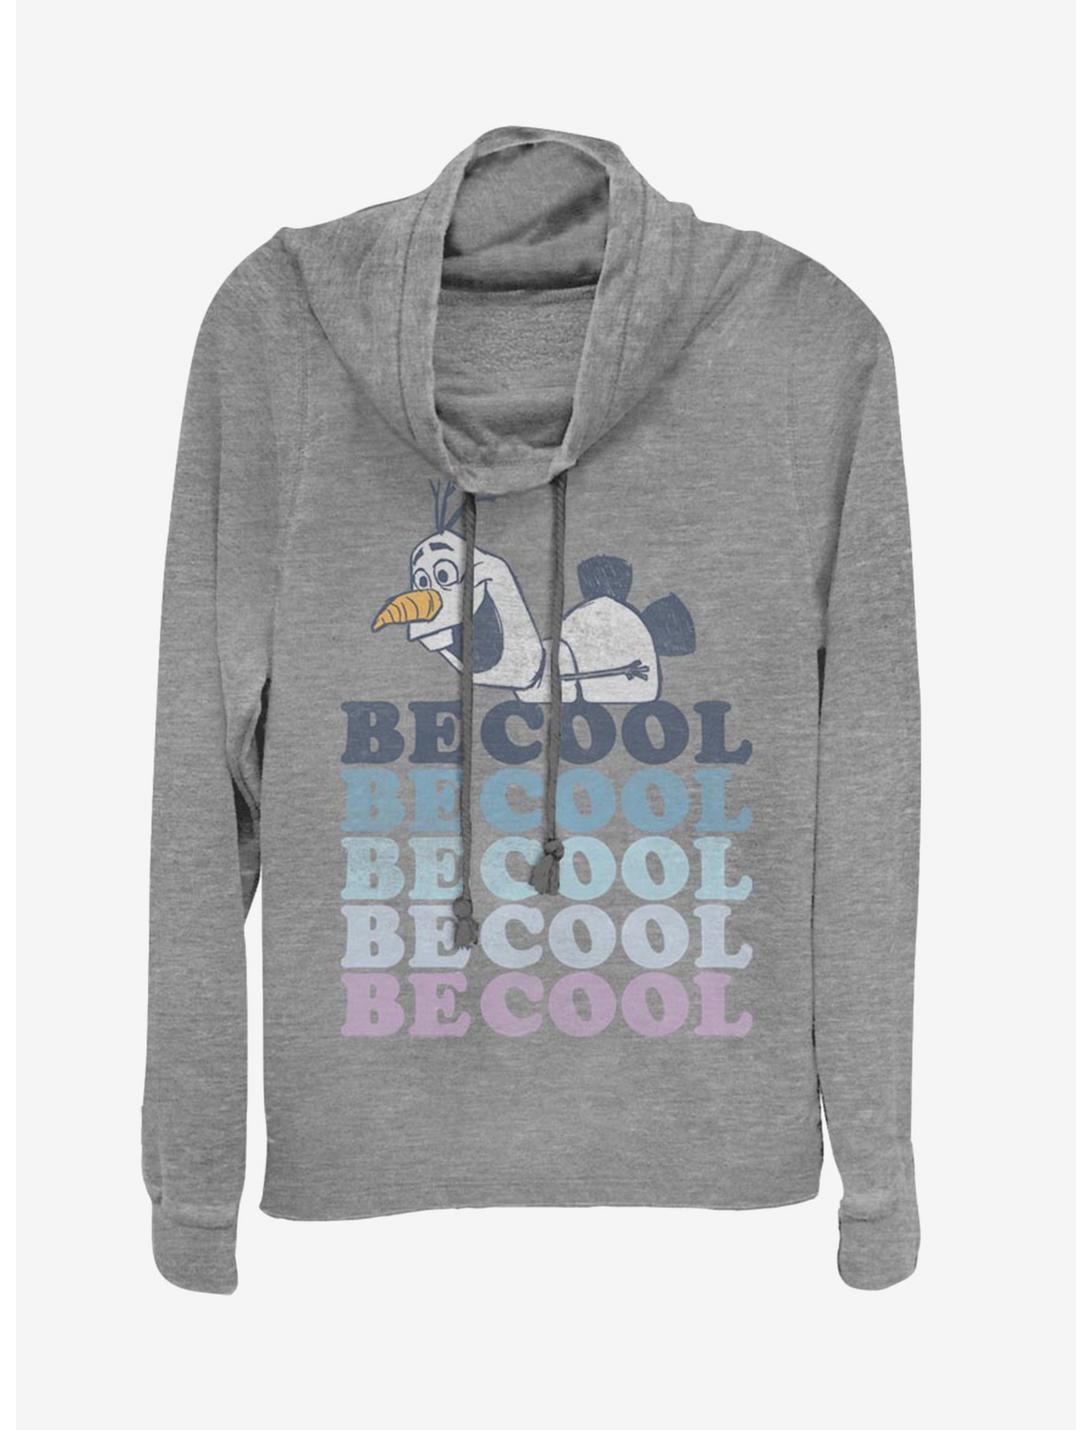 Disney Frozen 2 Olaf Be Cool Cowl Neck Long-Sleeve Girls Top, GRAY HTR, hi-res